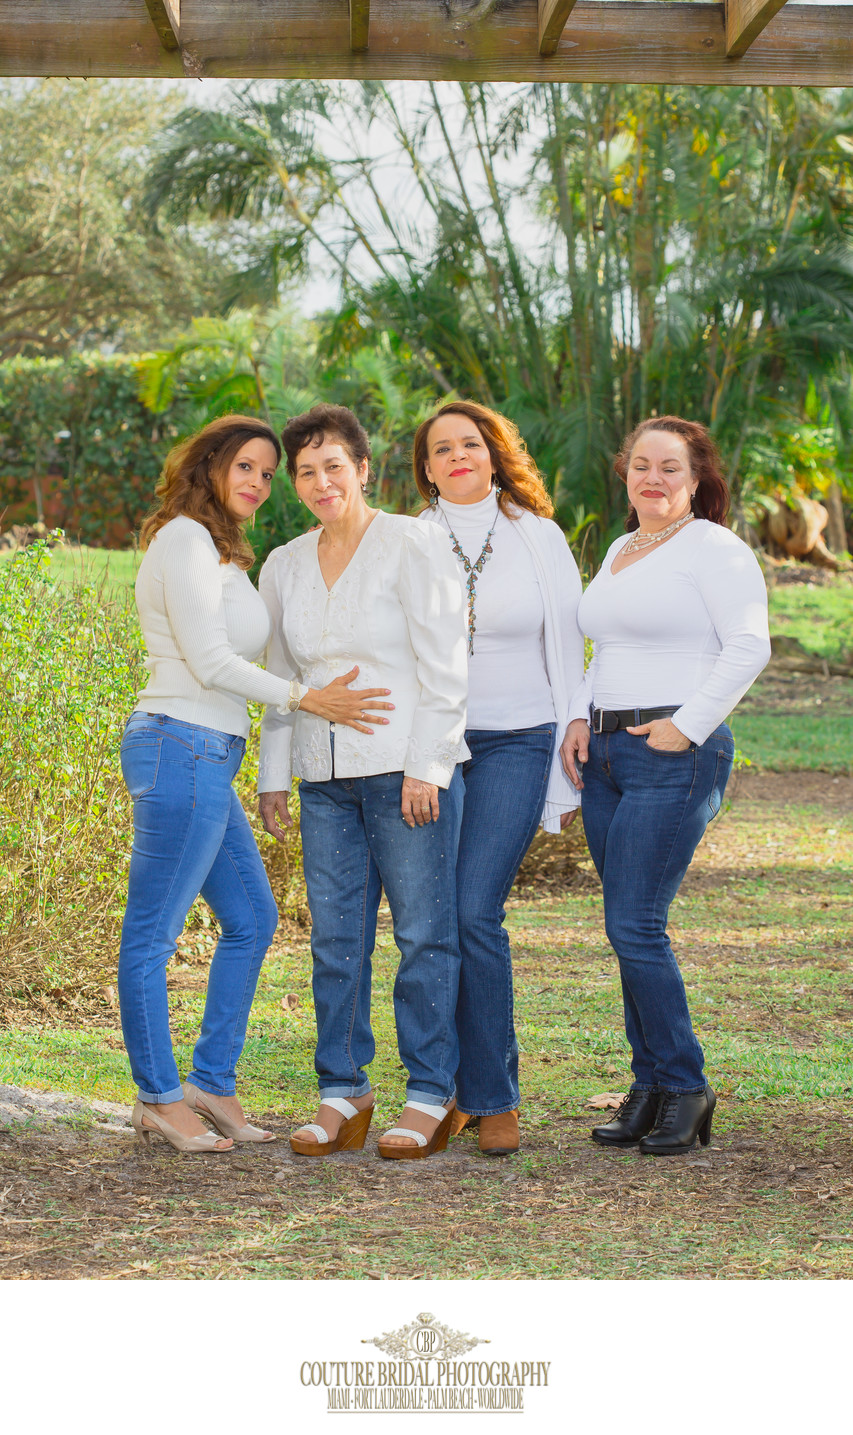 FAMILY PHOTO PHOTOGRAPHER FORT LAUDERDALE